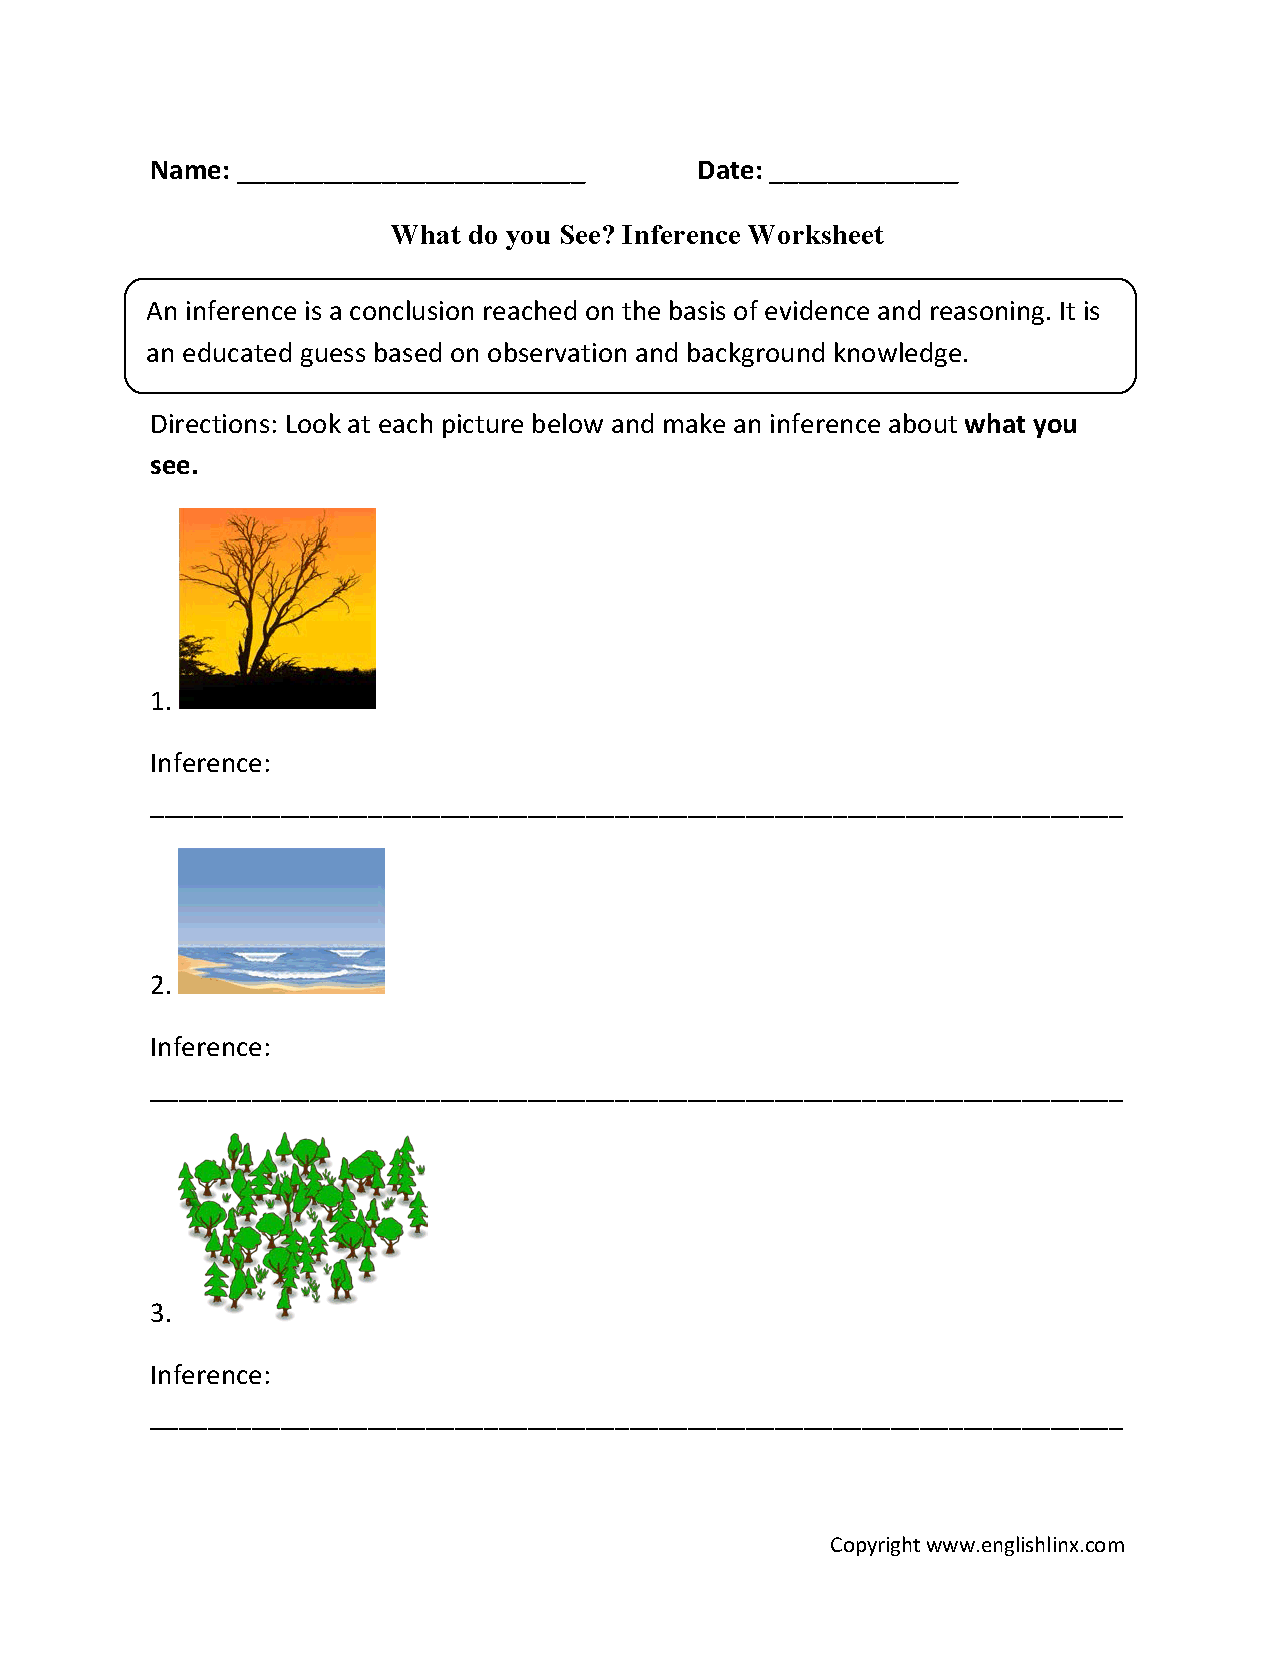 What do you See? Inference Worksheets